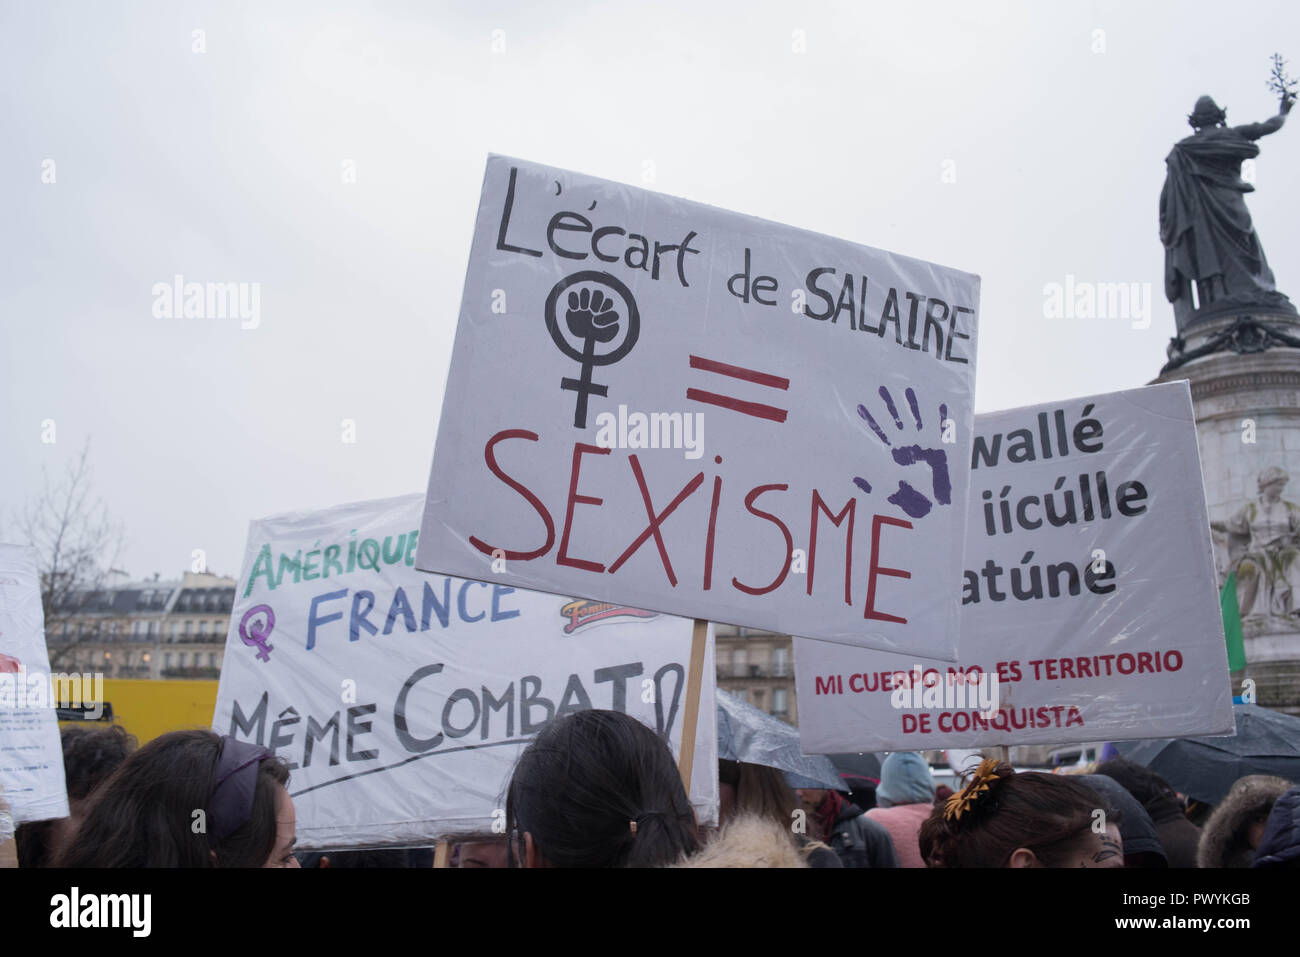 Paris: Rally and demonstration for women's rights Stock Photo